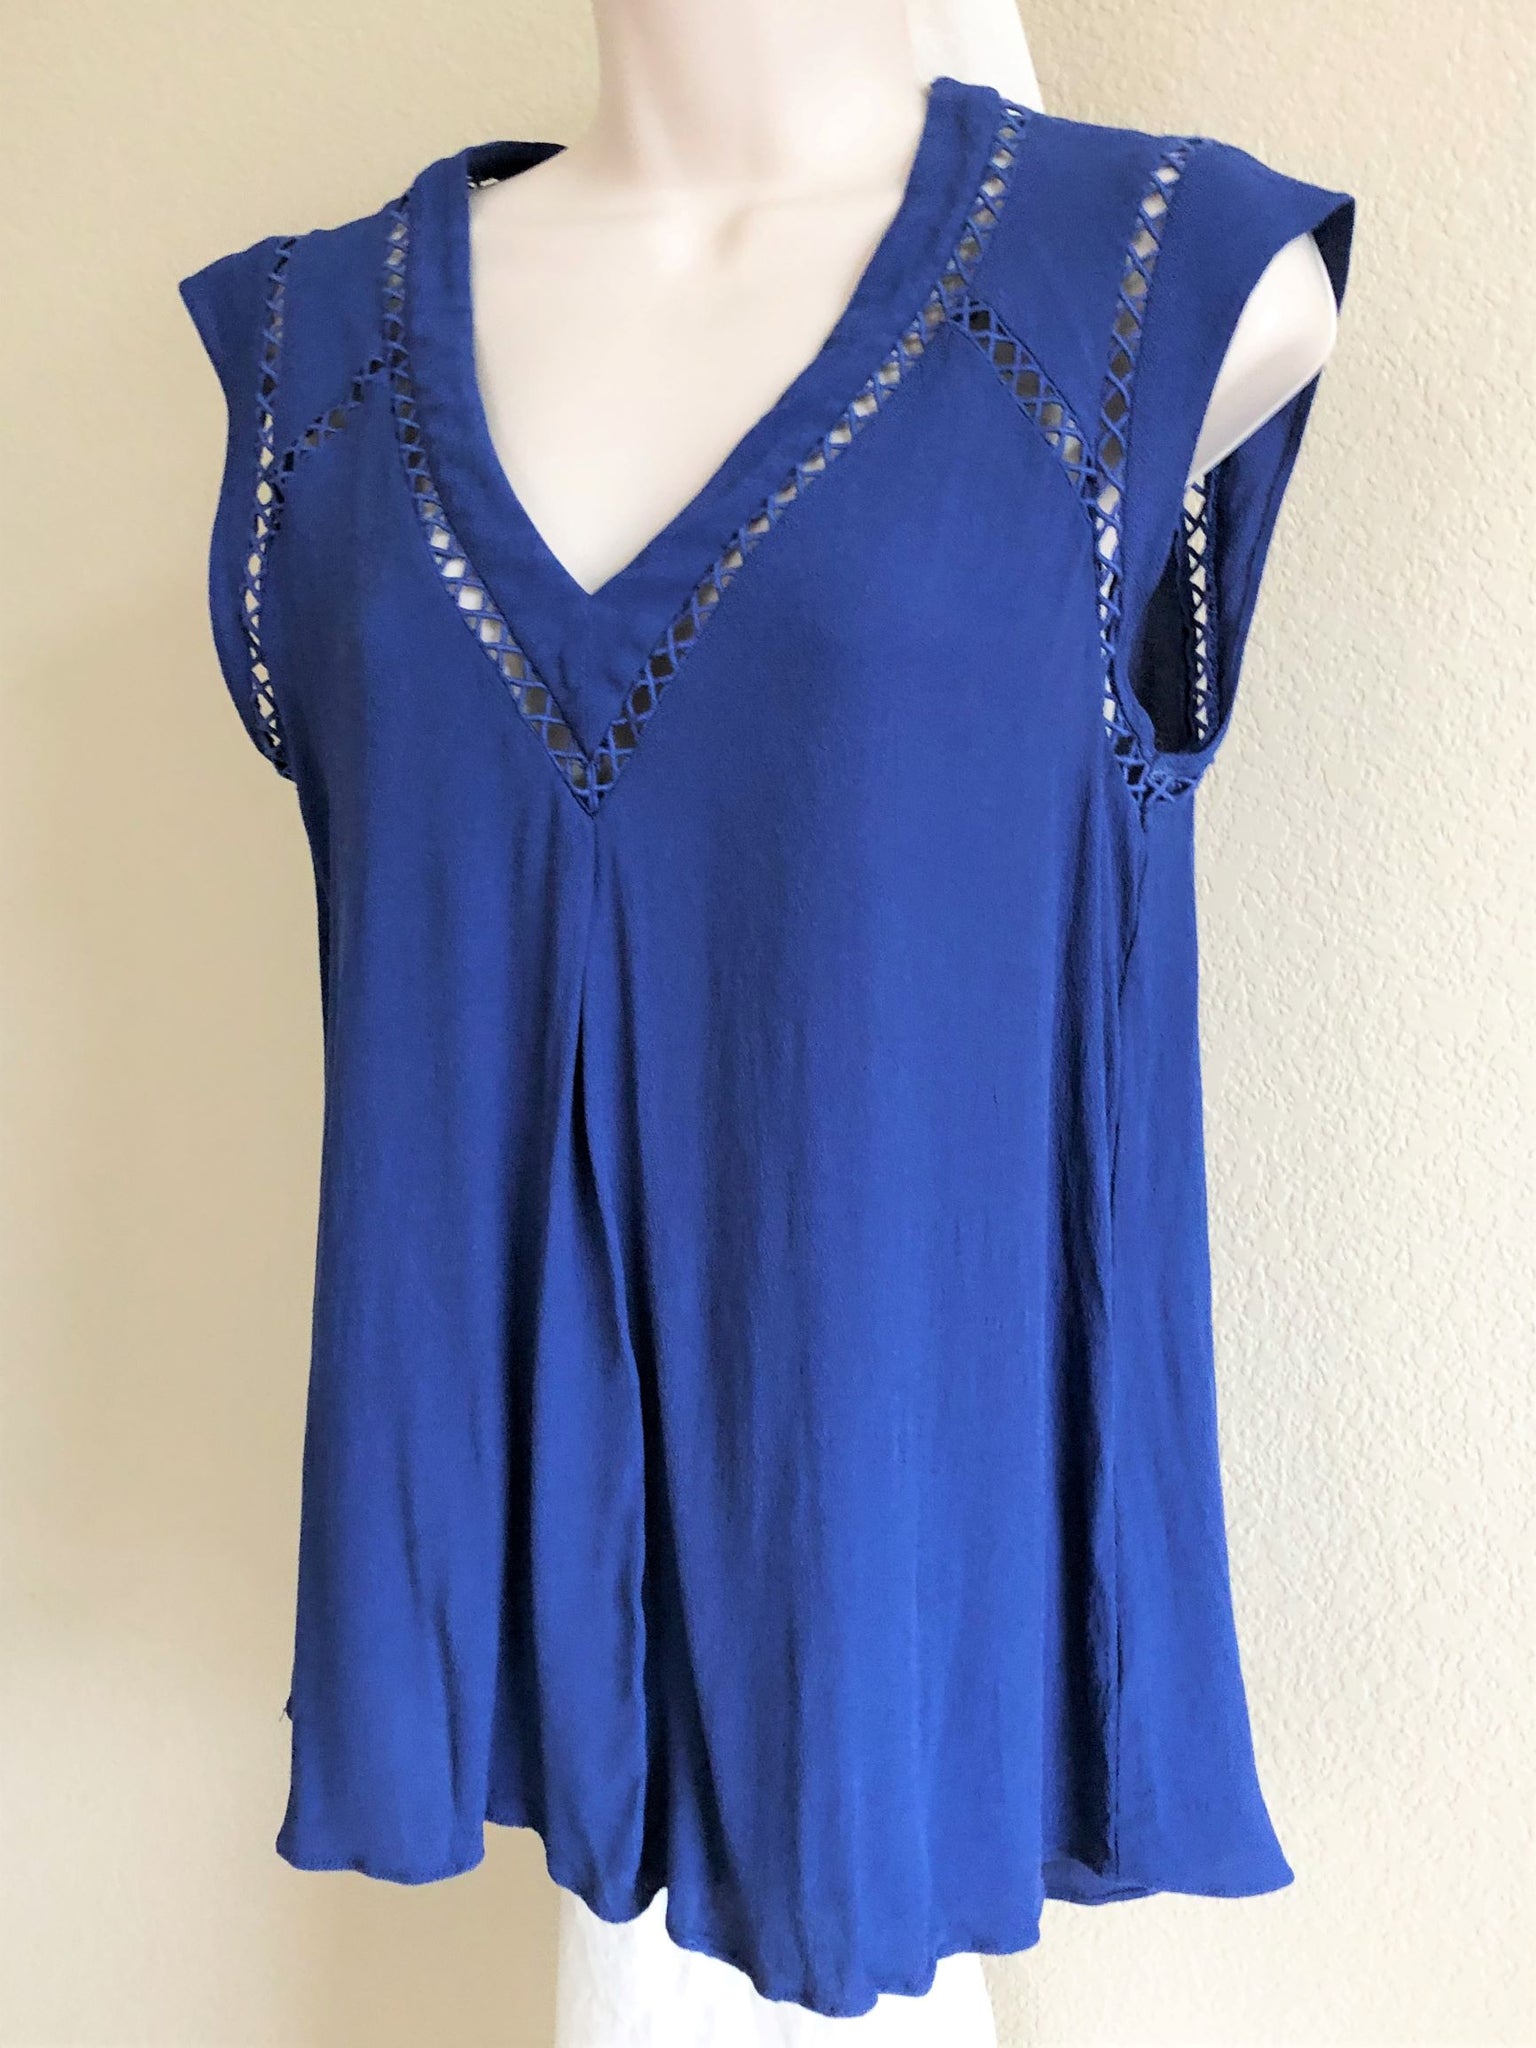 Rebecca Taylor Size 8 Blue Top - CLEARANCE